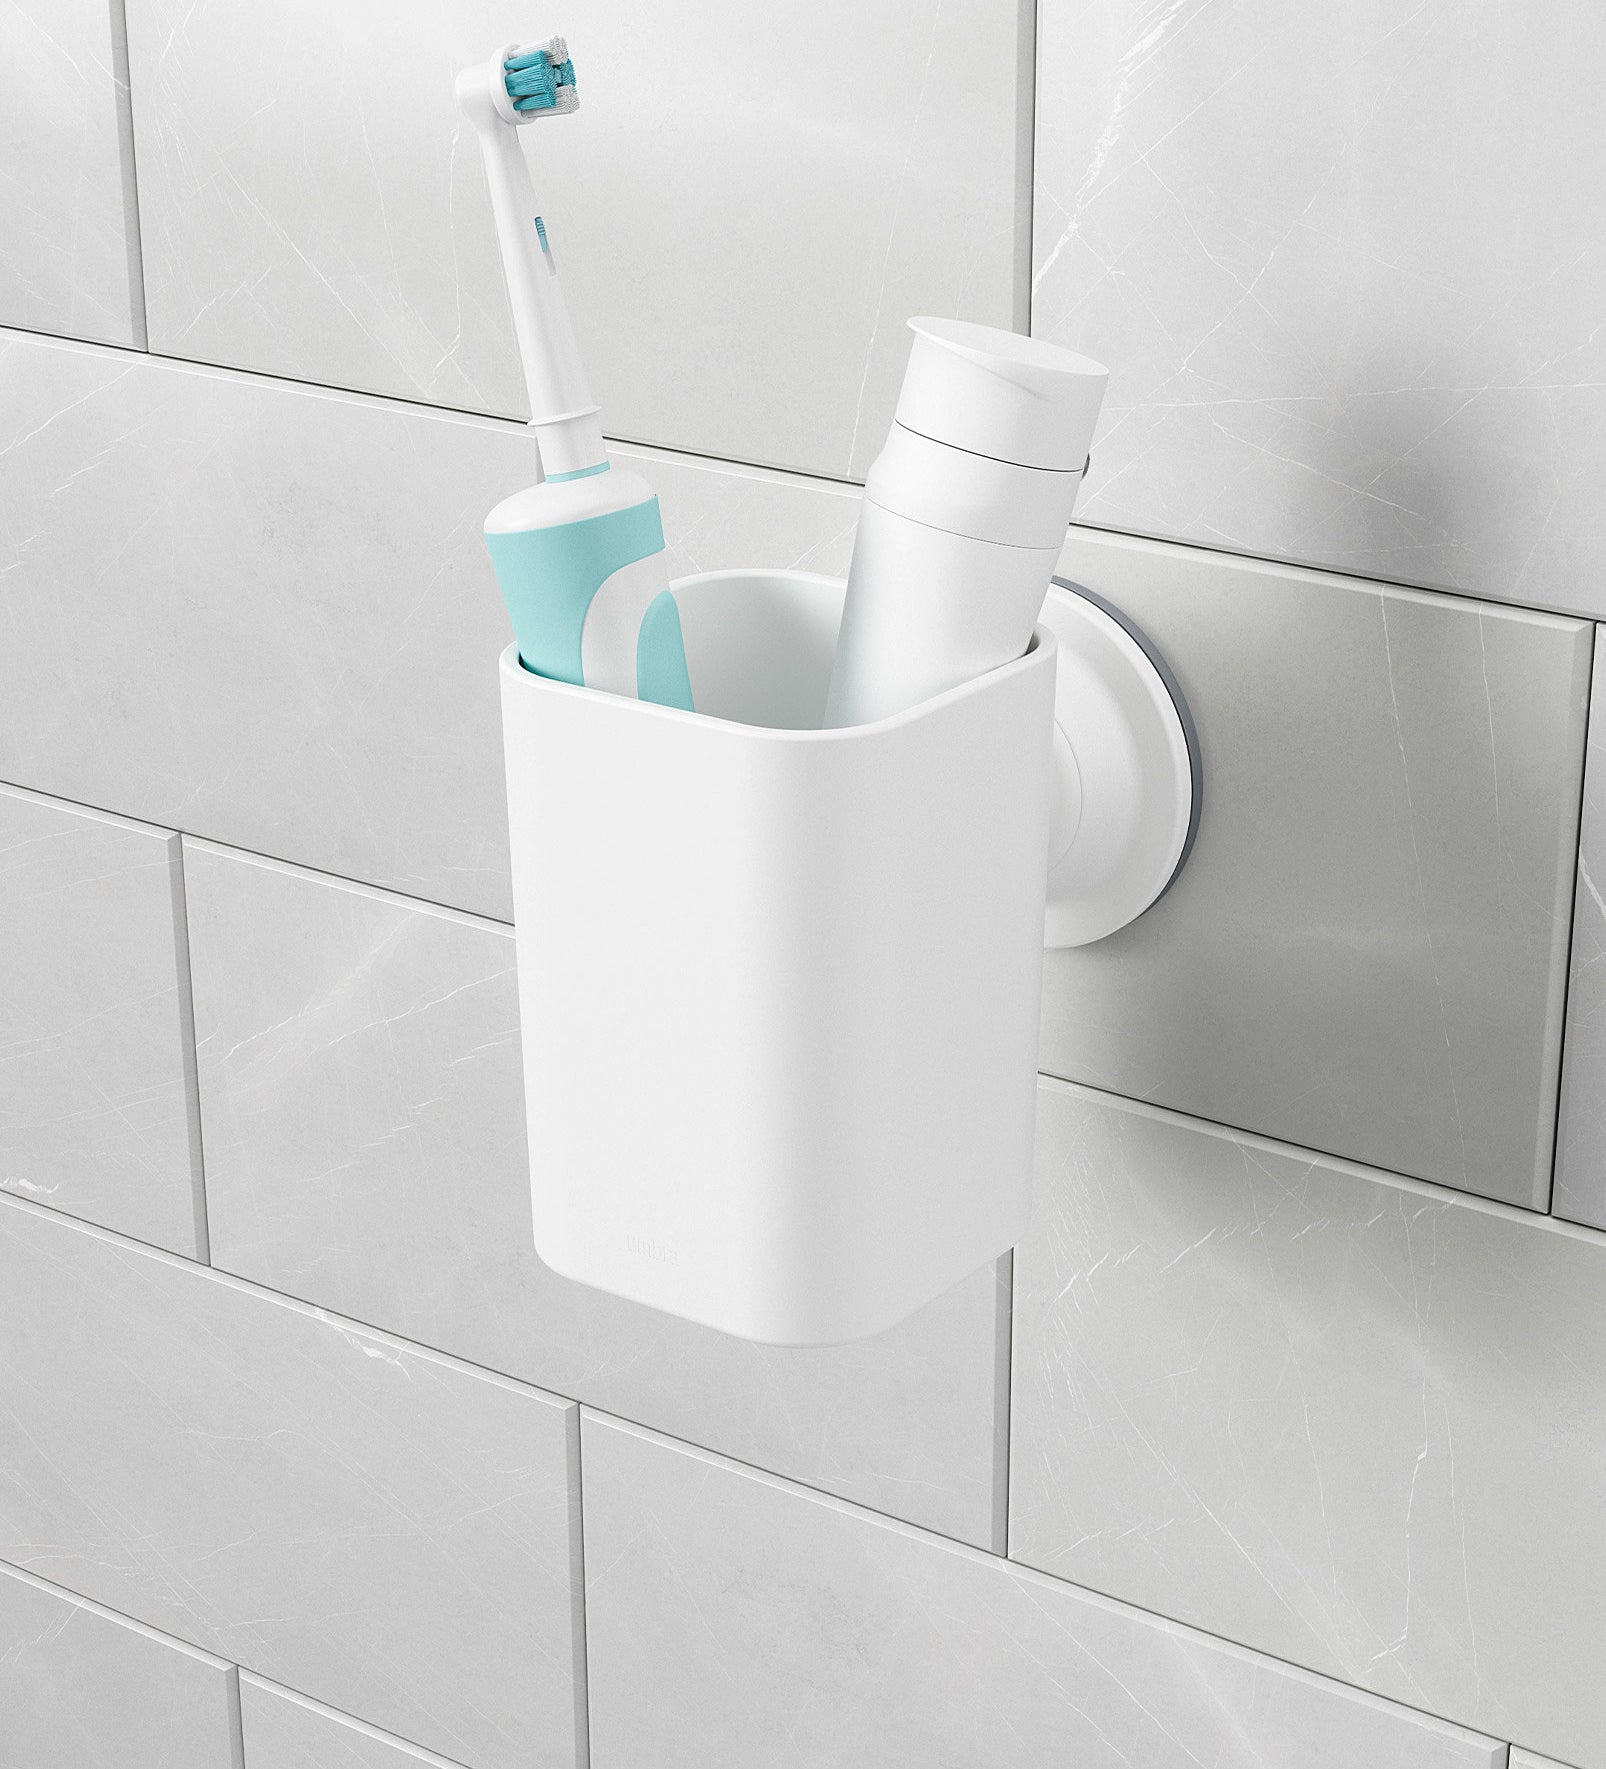 The toothbrush holder mounted via suction cup to a tiled wall